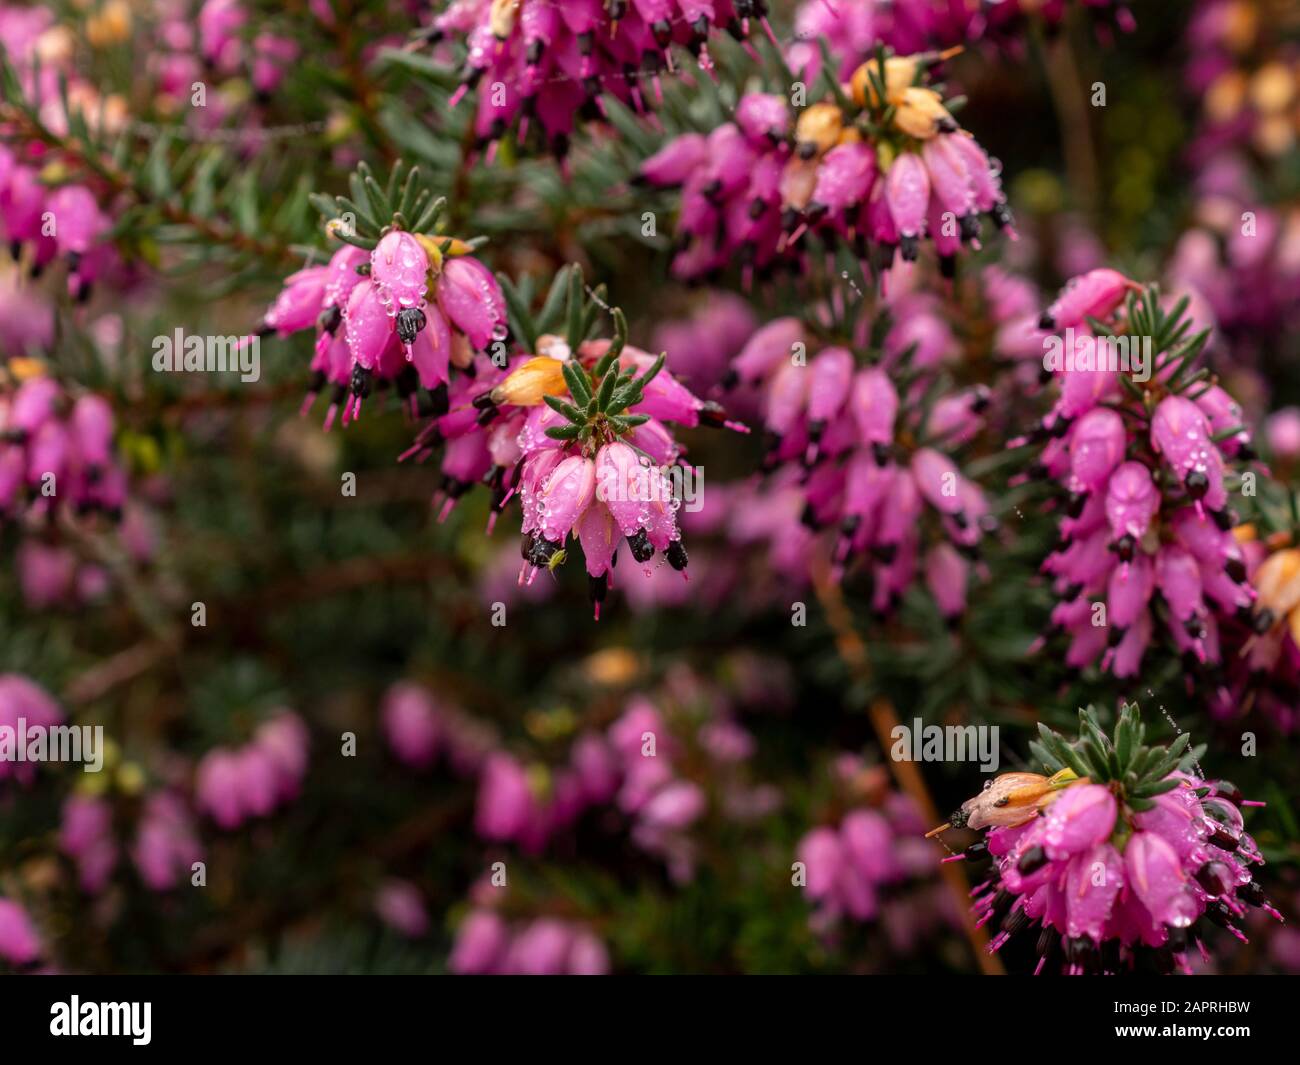 Closeup of the bright pink flowers and green leaves of the winter heath, Erica carnea Stock Photo